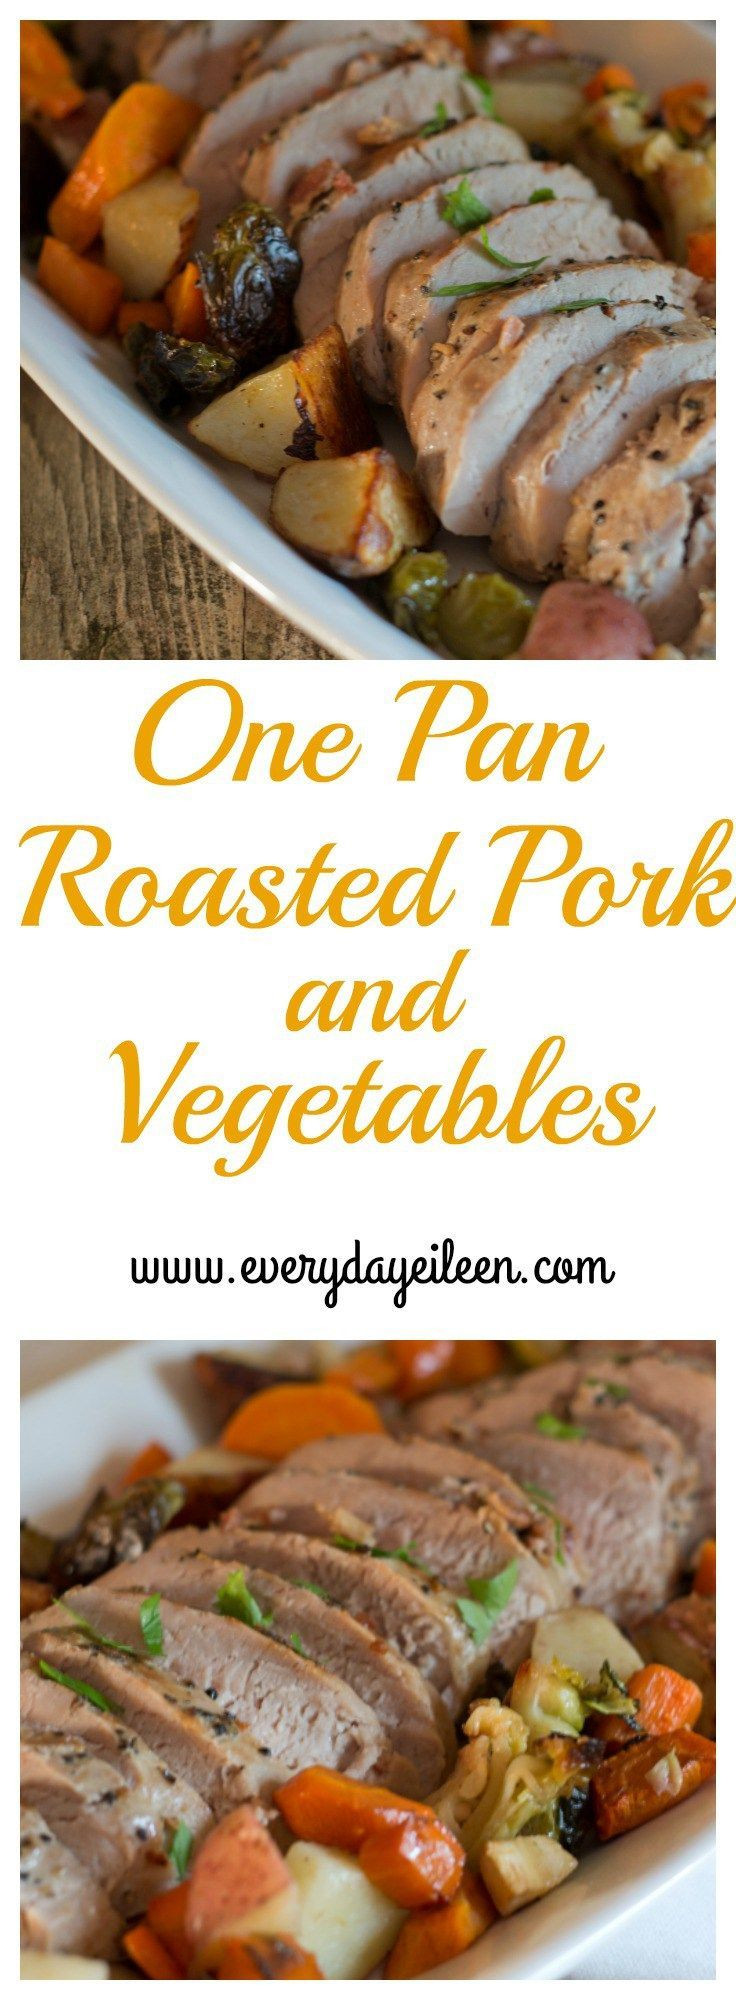 One Pan Pork Chops And Roasted Vegetables
 e Pan Roasted Pork and Ve ables Recipe